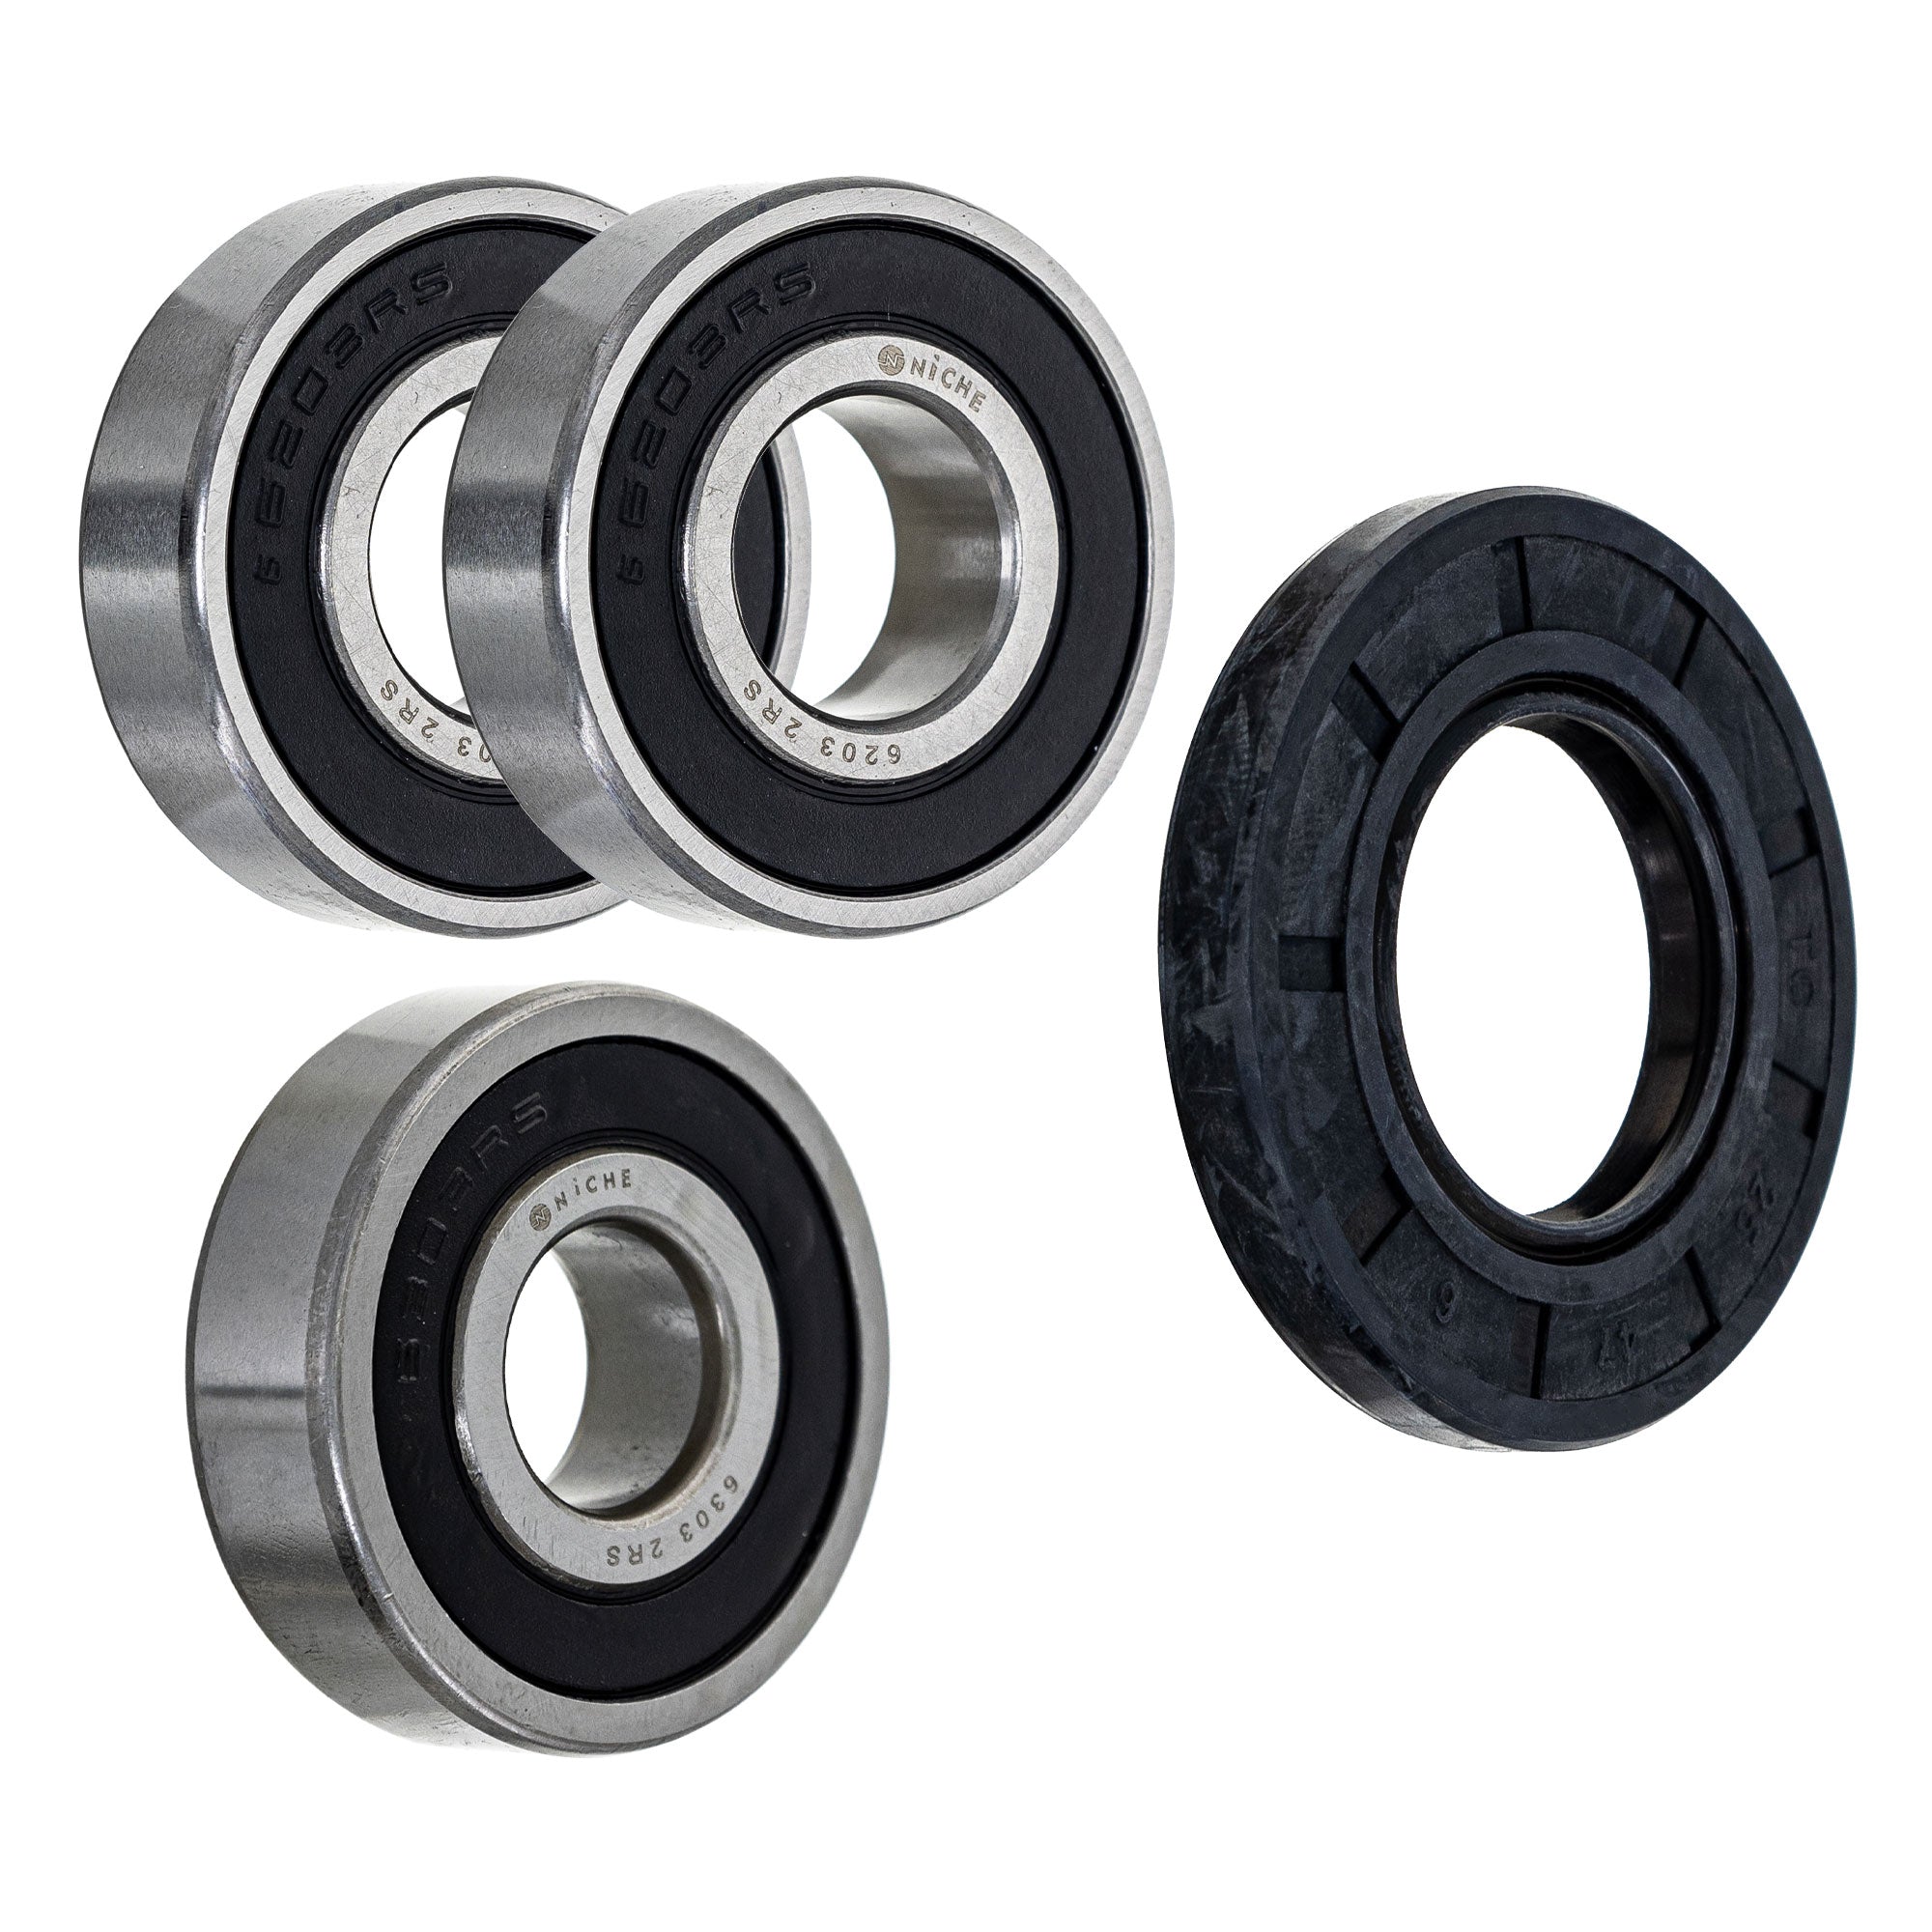 Wheel Bearing Seal Kit for zOTHER Ref No V NICHE MK1008992